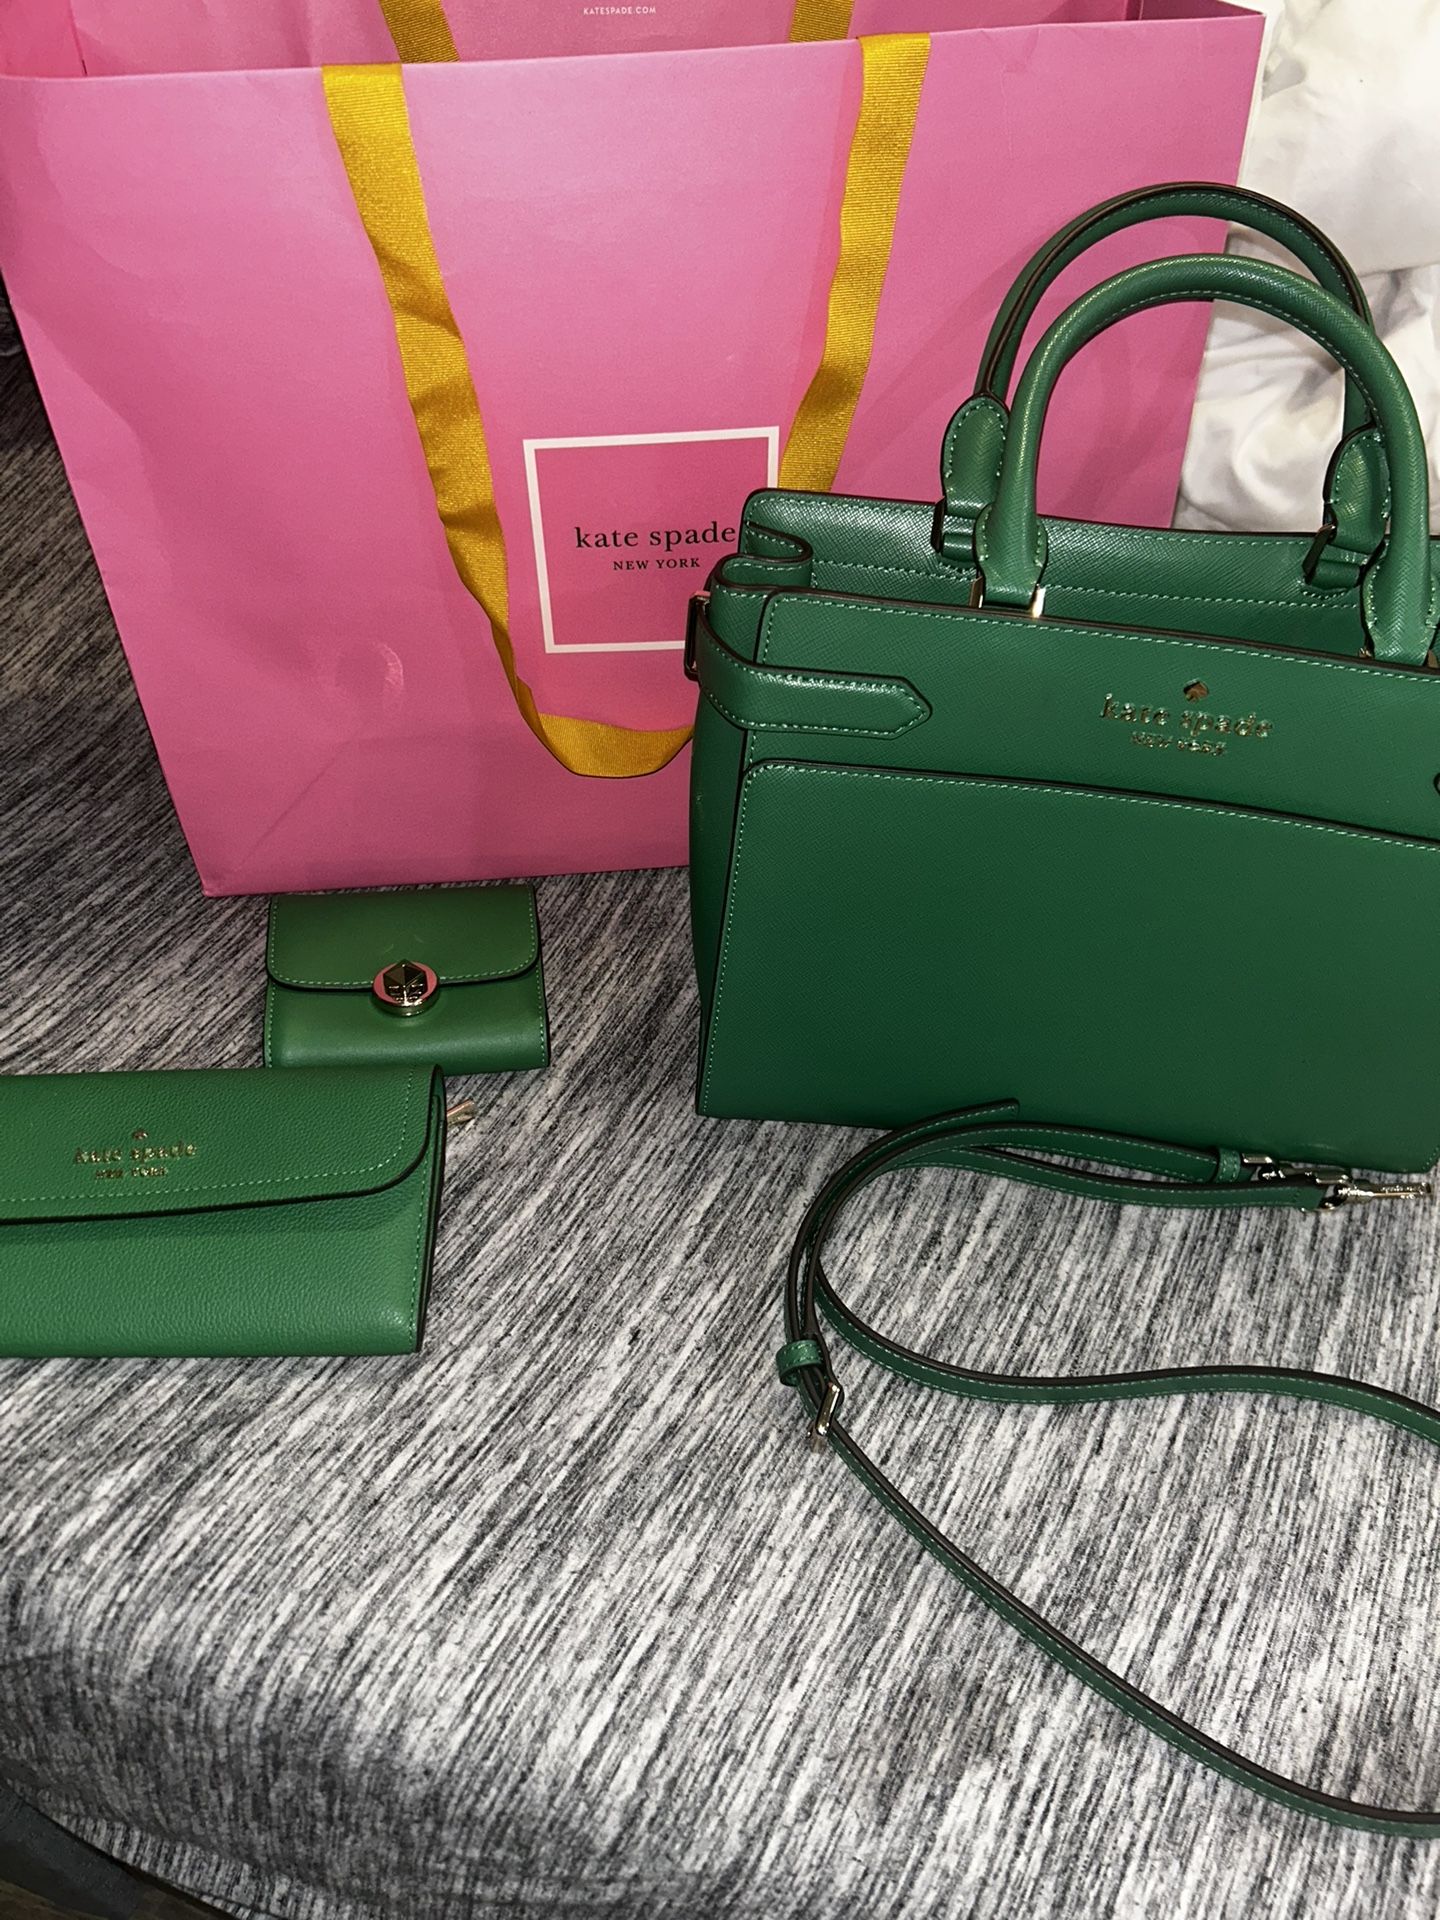 Kate Spade Purse And Wallets 